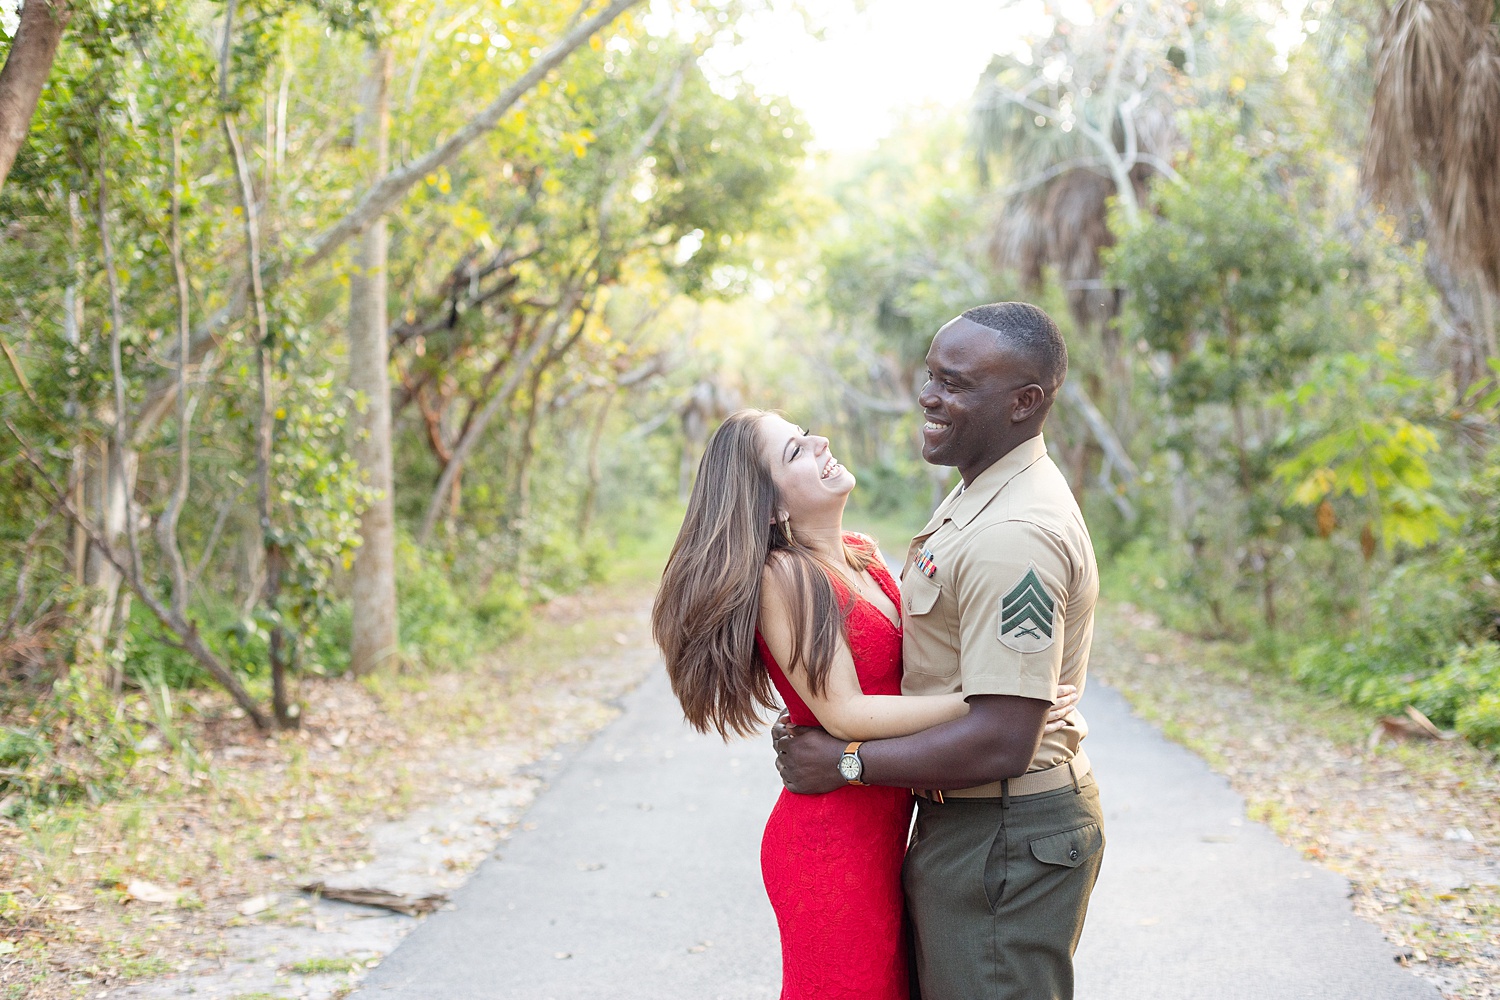 A US Marine and an event planner's Key Biscayne Engagement Session at Bill Baggs State Park in Miami, Florida | Chris Sosa Photography